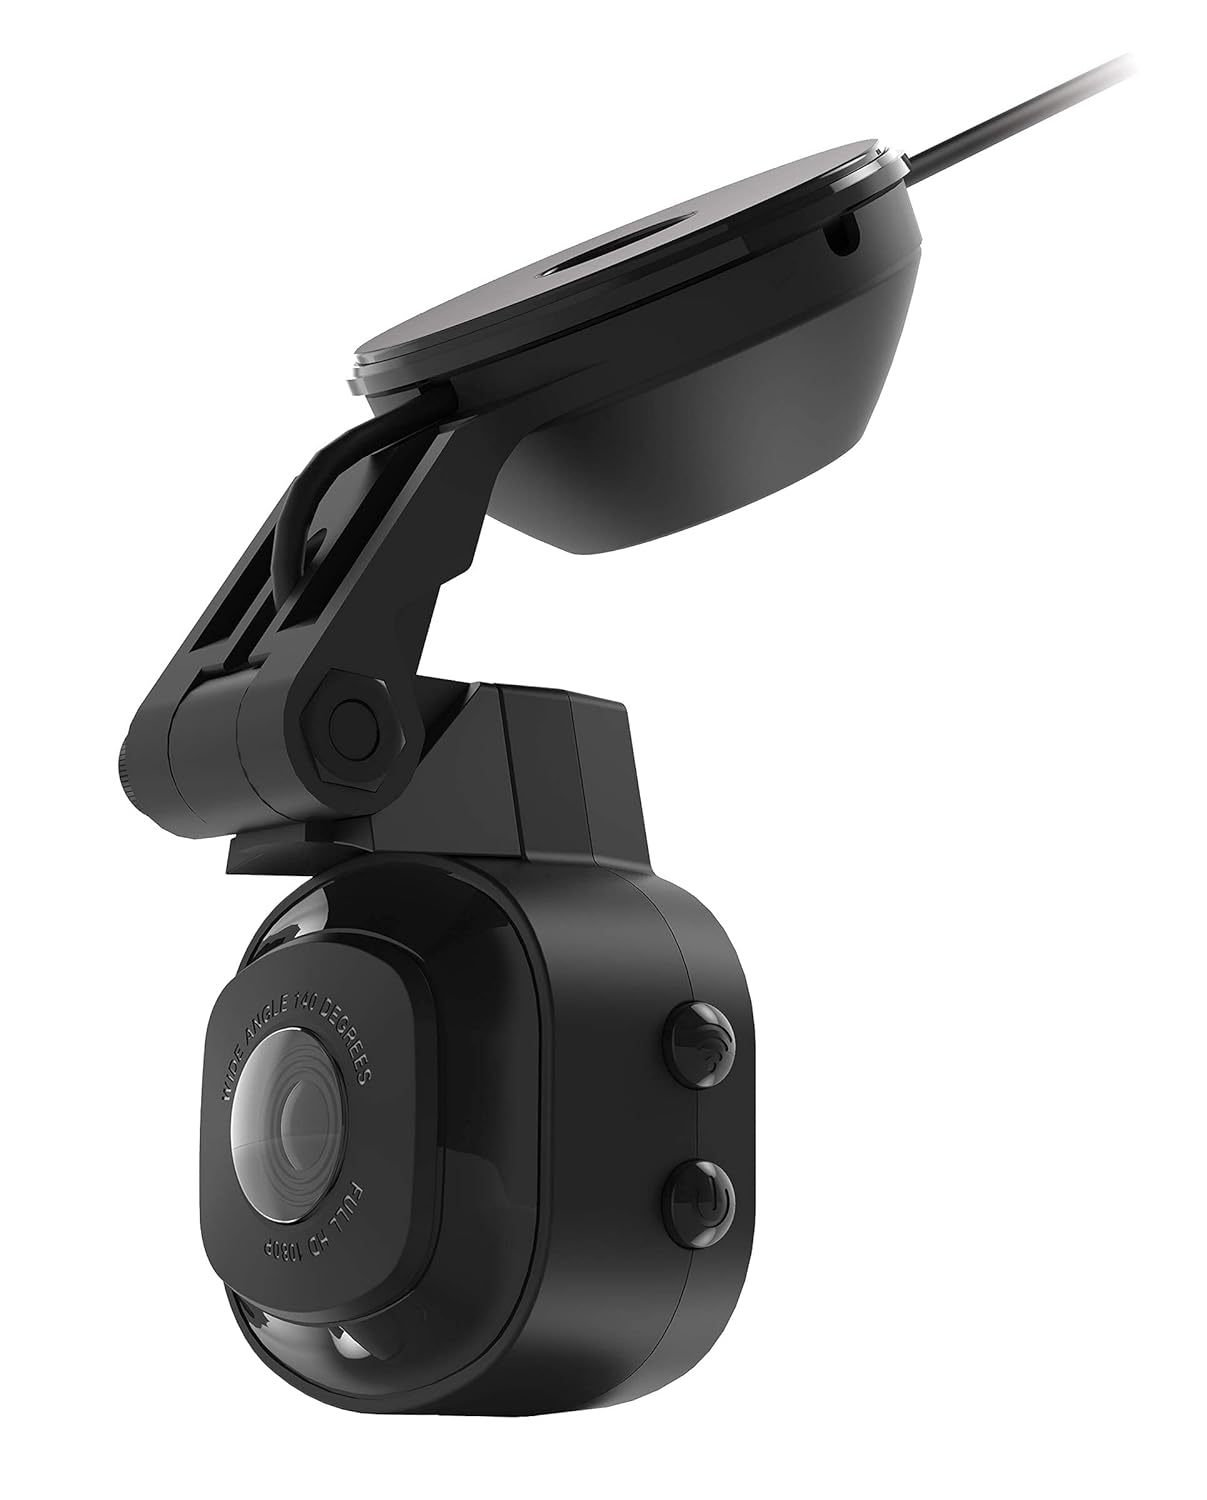 SCOSCHE NEXC11032 Full HD Smart Dash Cam Powered by Nexar with Suction Cup Mount & 32GB Micro-SD Card - Black